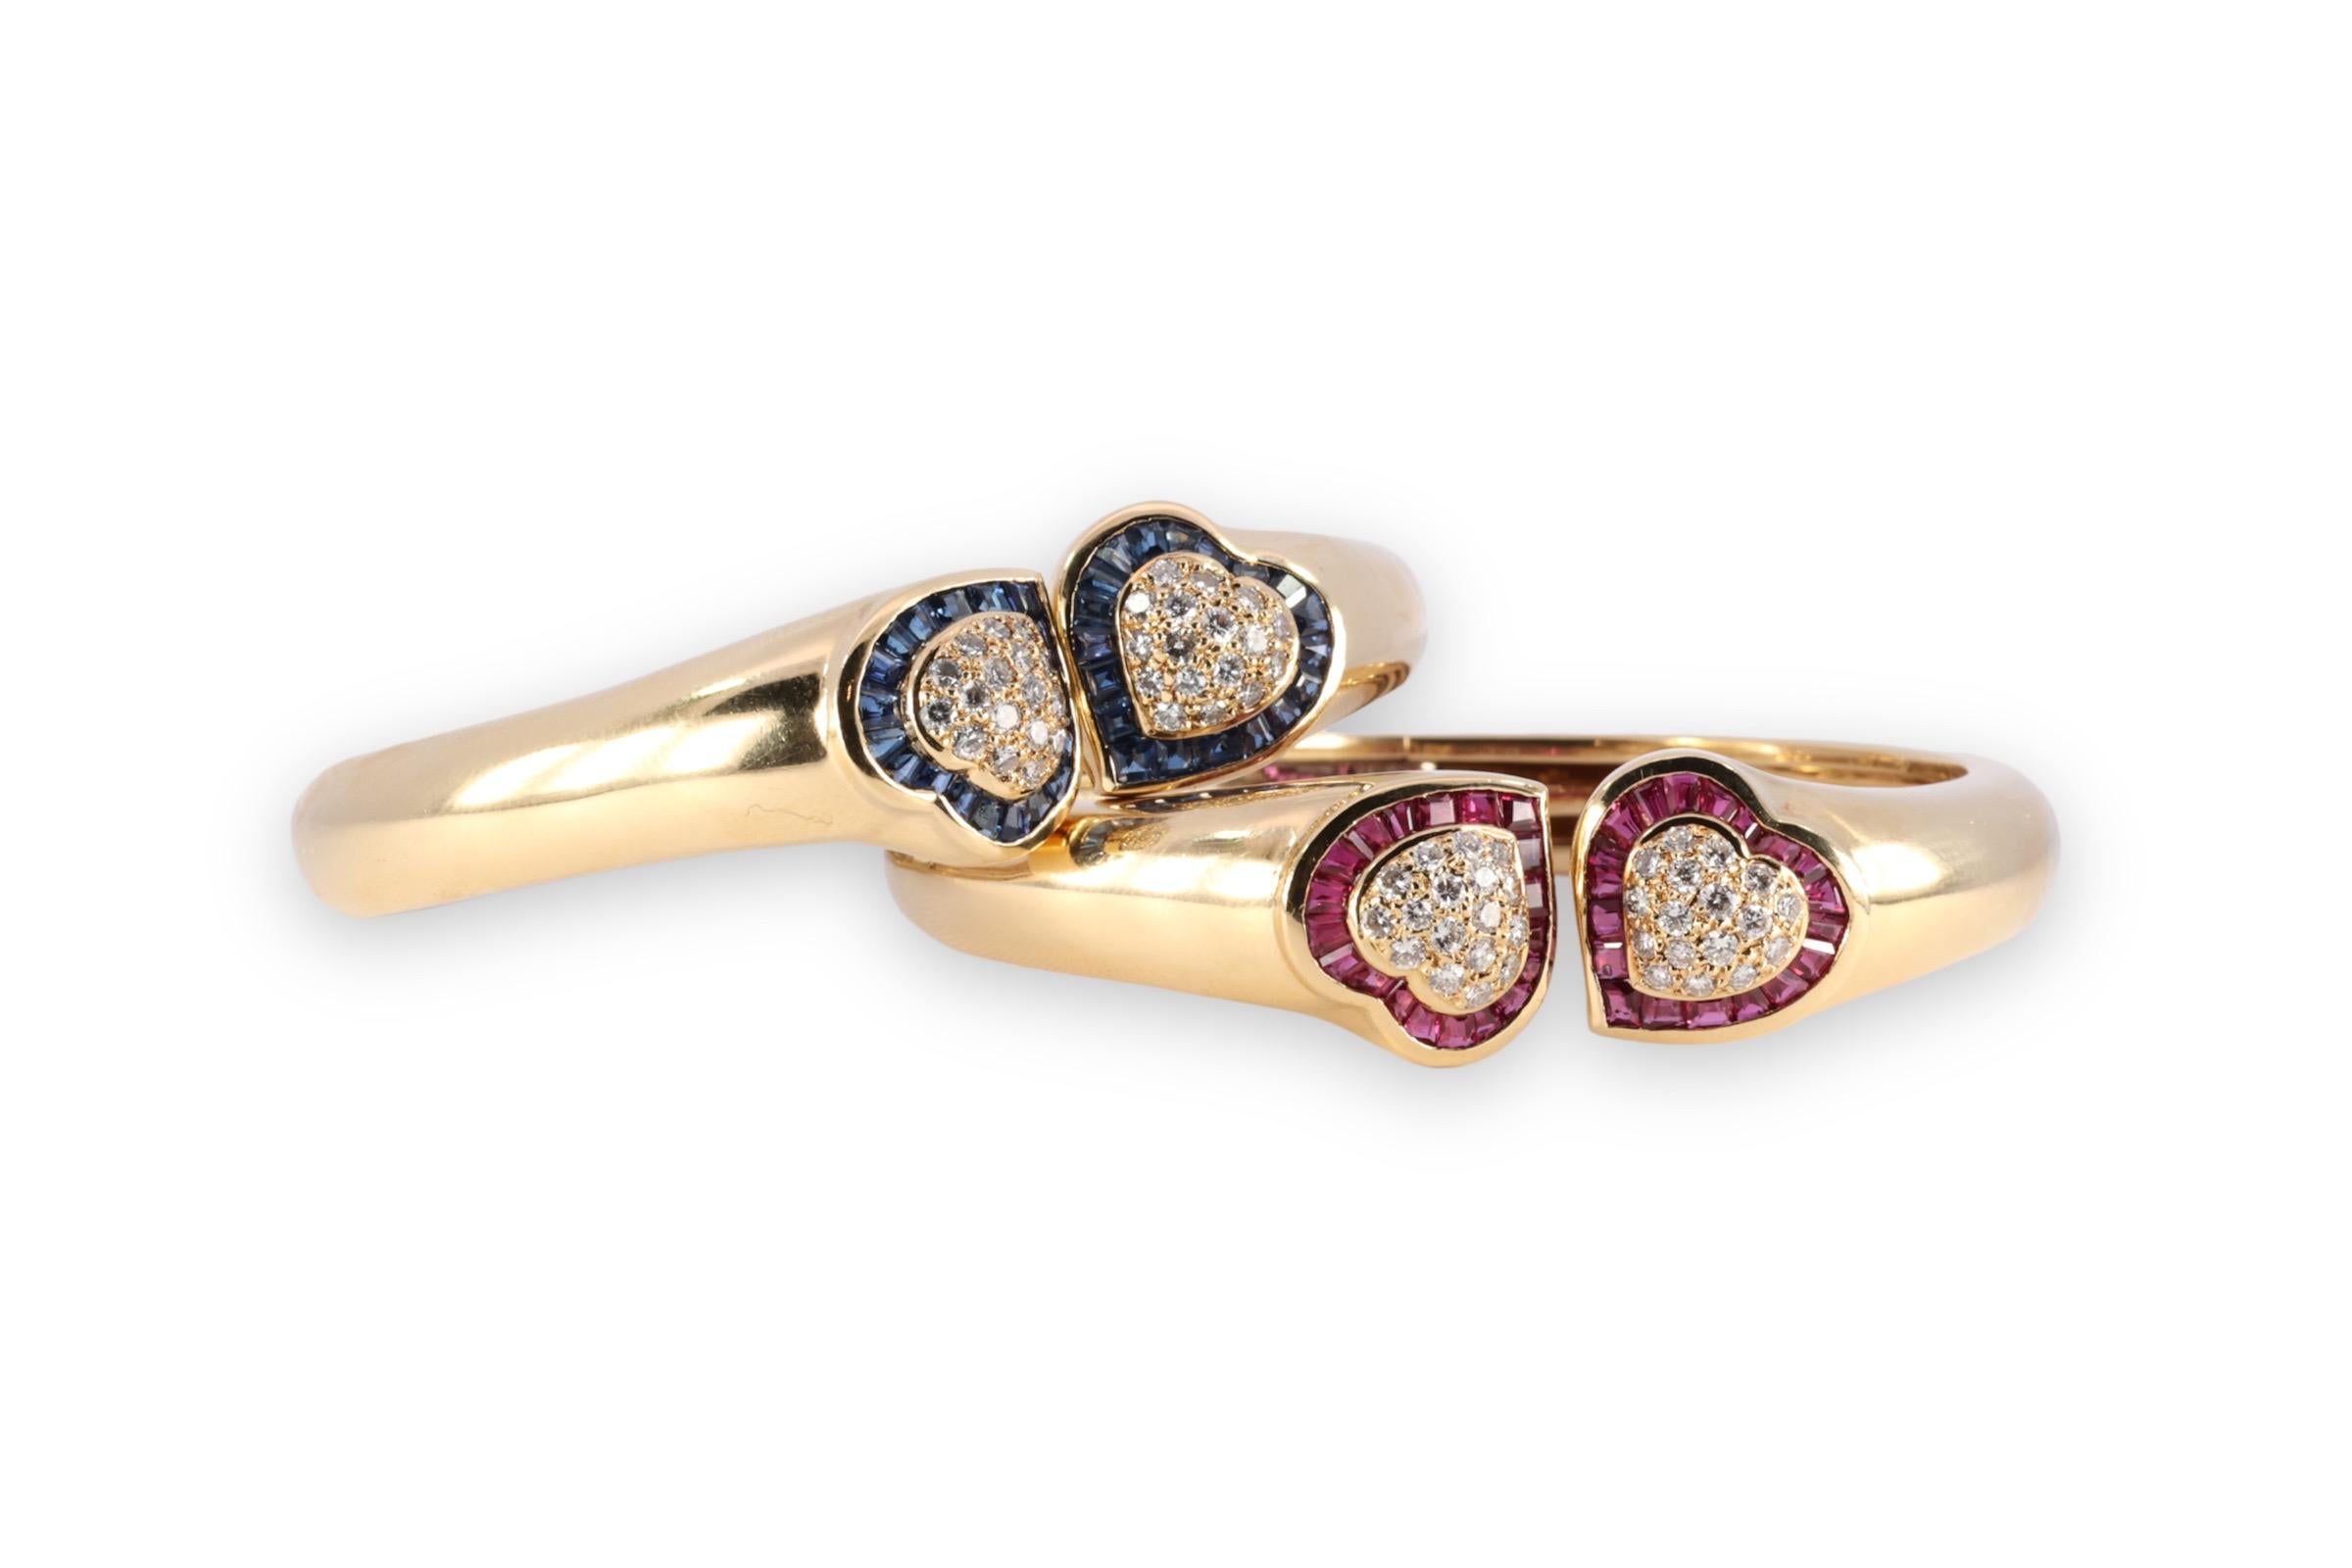 Gorgeous Set of 2 Adler Genève Heart Bracelets in 18kt Yellow Gold Set with Sapphire, Ruby, Diamonds from Estate His MAjesty the Sultan Of Oman Qaboos Bin Said

2 Bracelet Total weight: 89.7 gram 

Ruby Bracelet: 
Diamonds: Brilliant cut diamonds